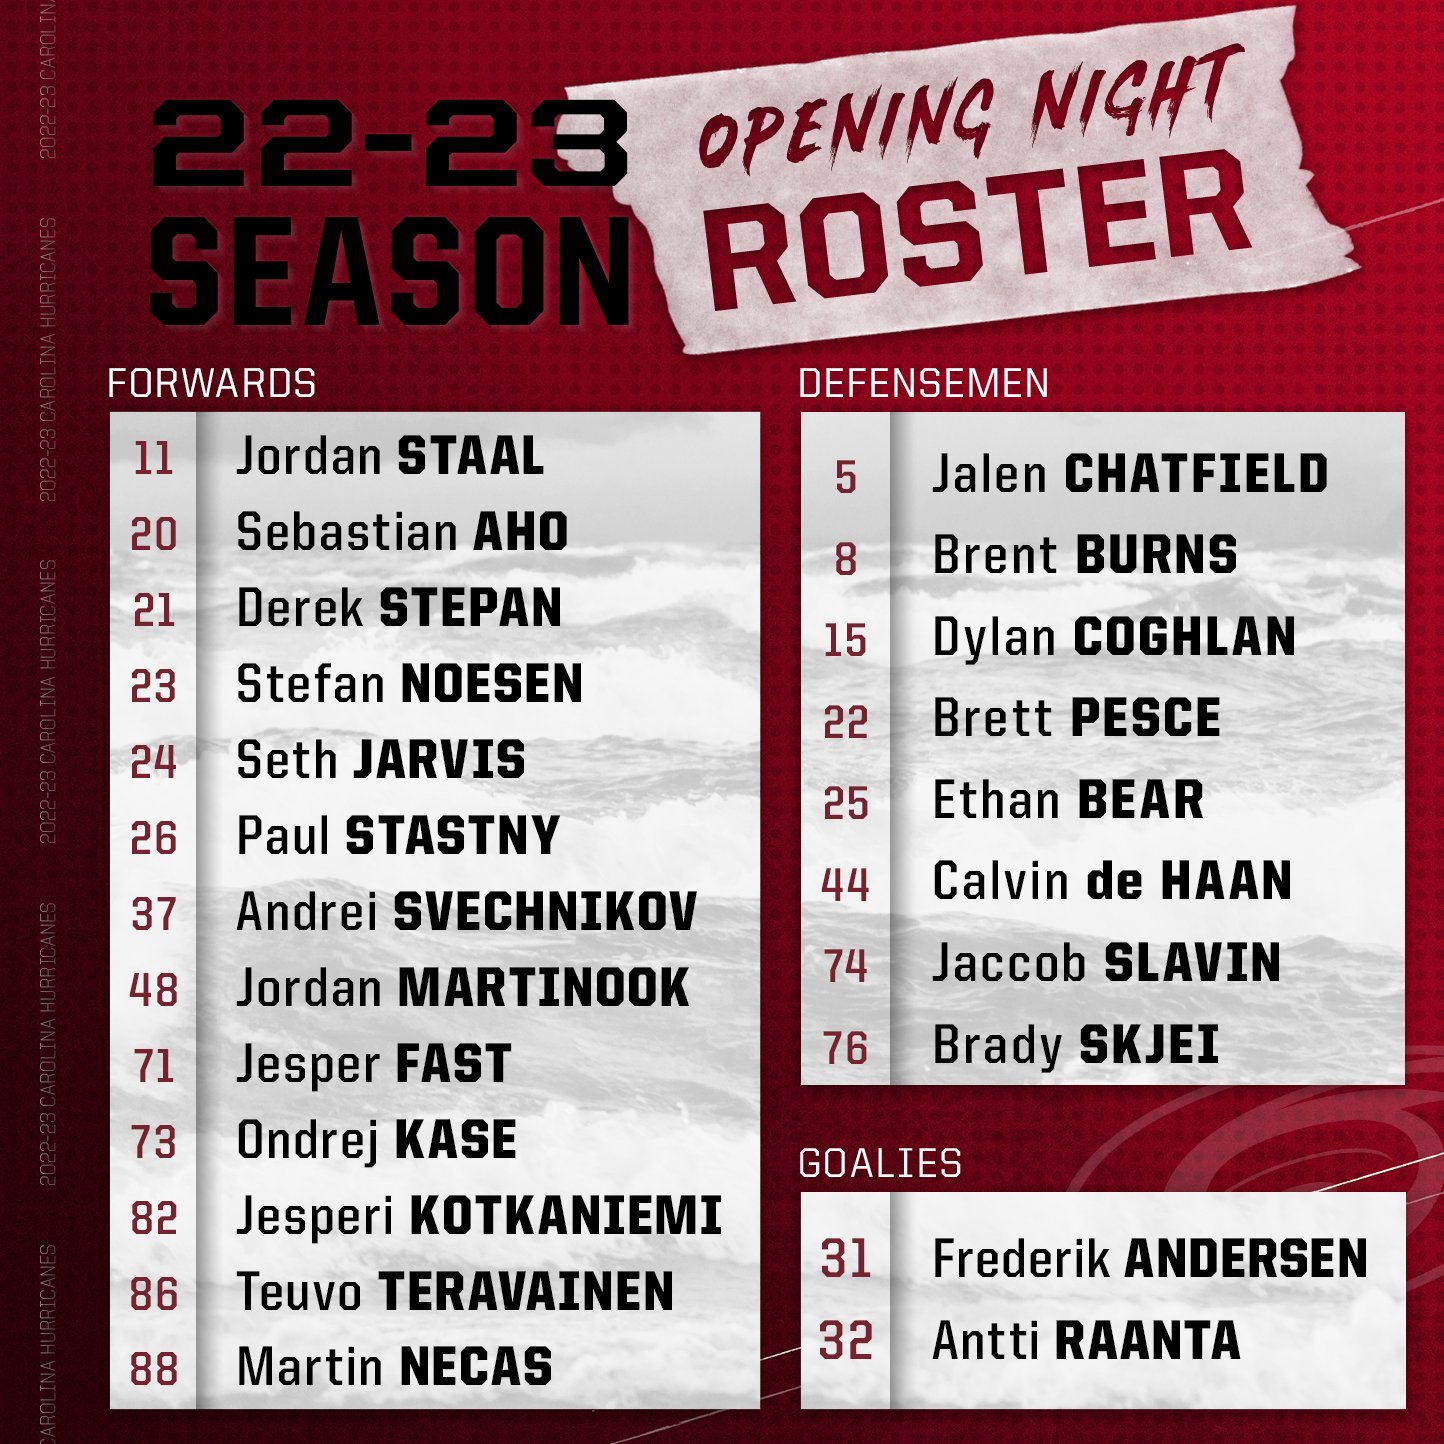 Carolina Hurricanes: The 2021-22 roster confirmation